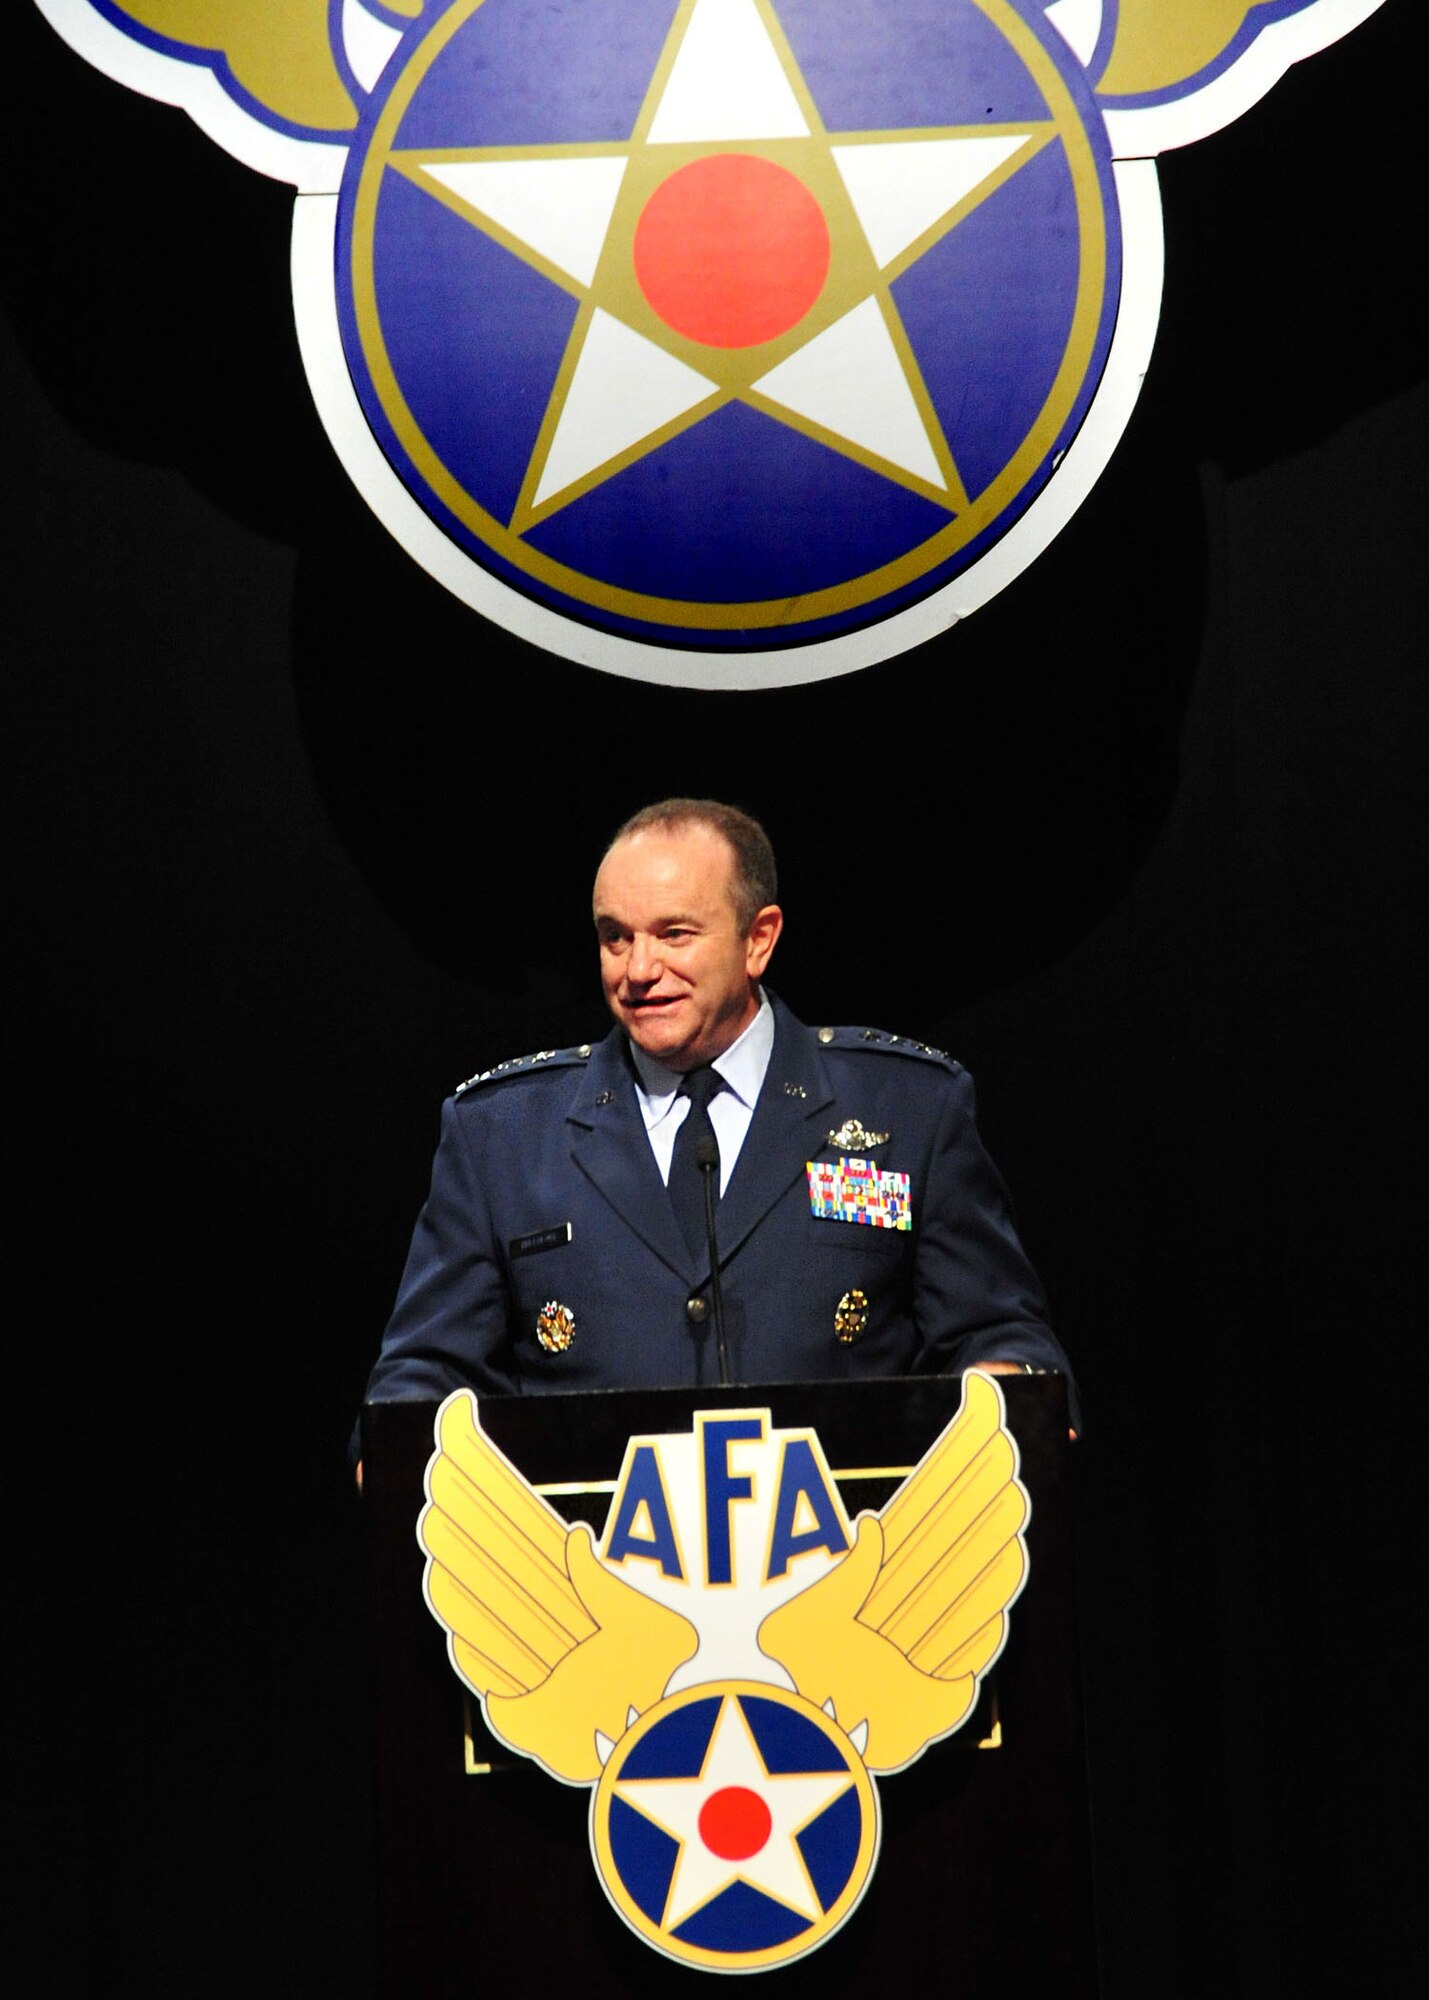 Air Force Vice Chief of Staff Gen. Phil Breedlove speaks at the Air Force Association's 2011 Global Warfare Symposium in Los Angeles, Calif., Nov. 18, 2011.  Breedlove discussed current operations as well as the unique and enduring capabilities the Air Force provides the nation. (U.S. Air Force photo/Lou Hernandez)
